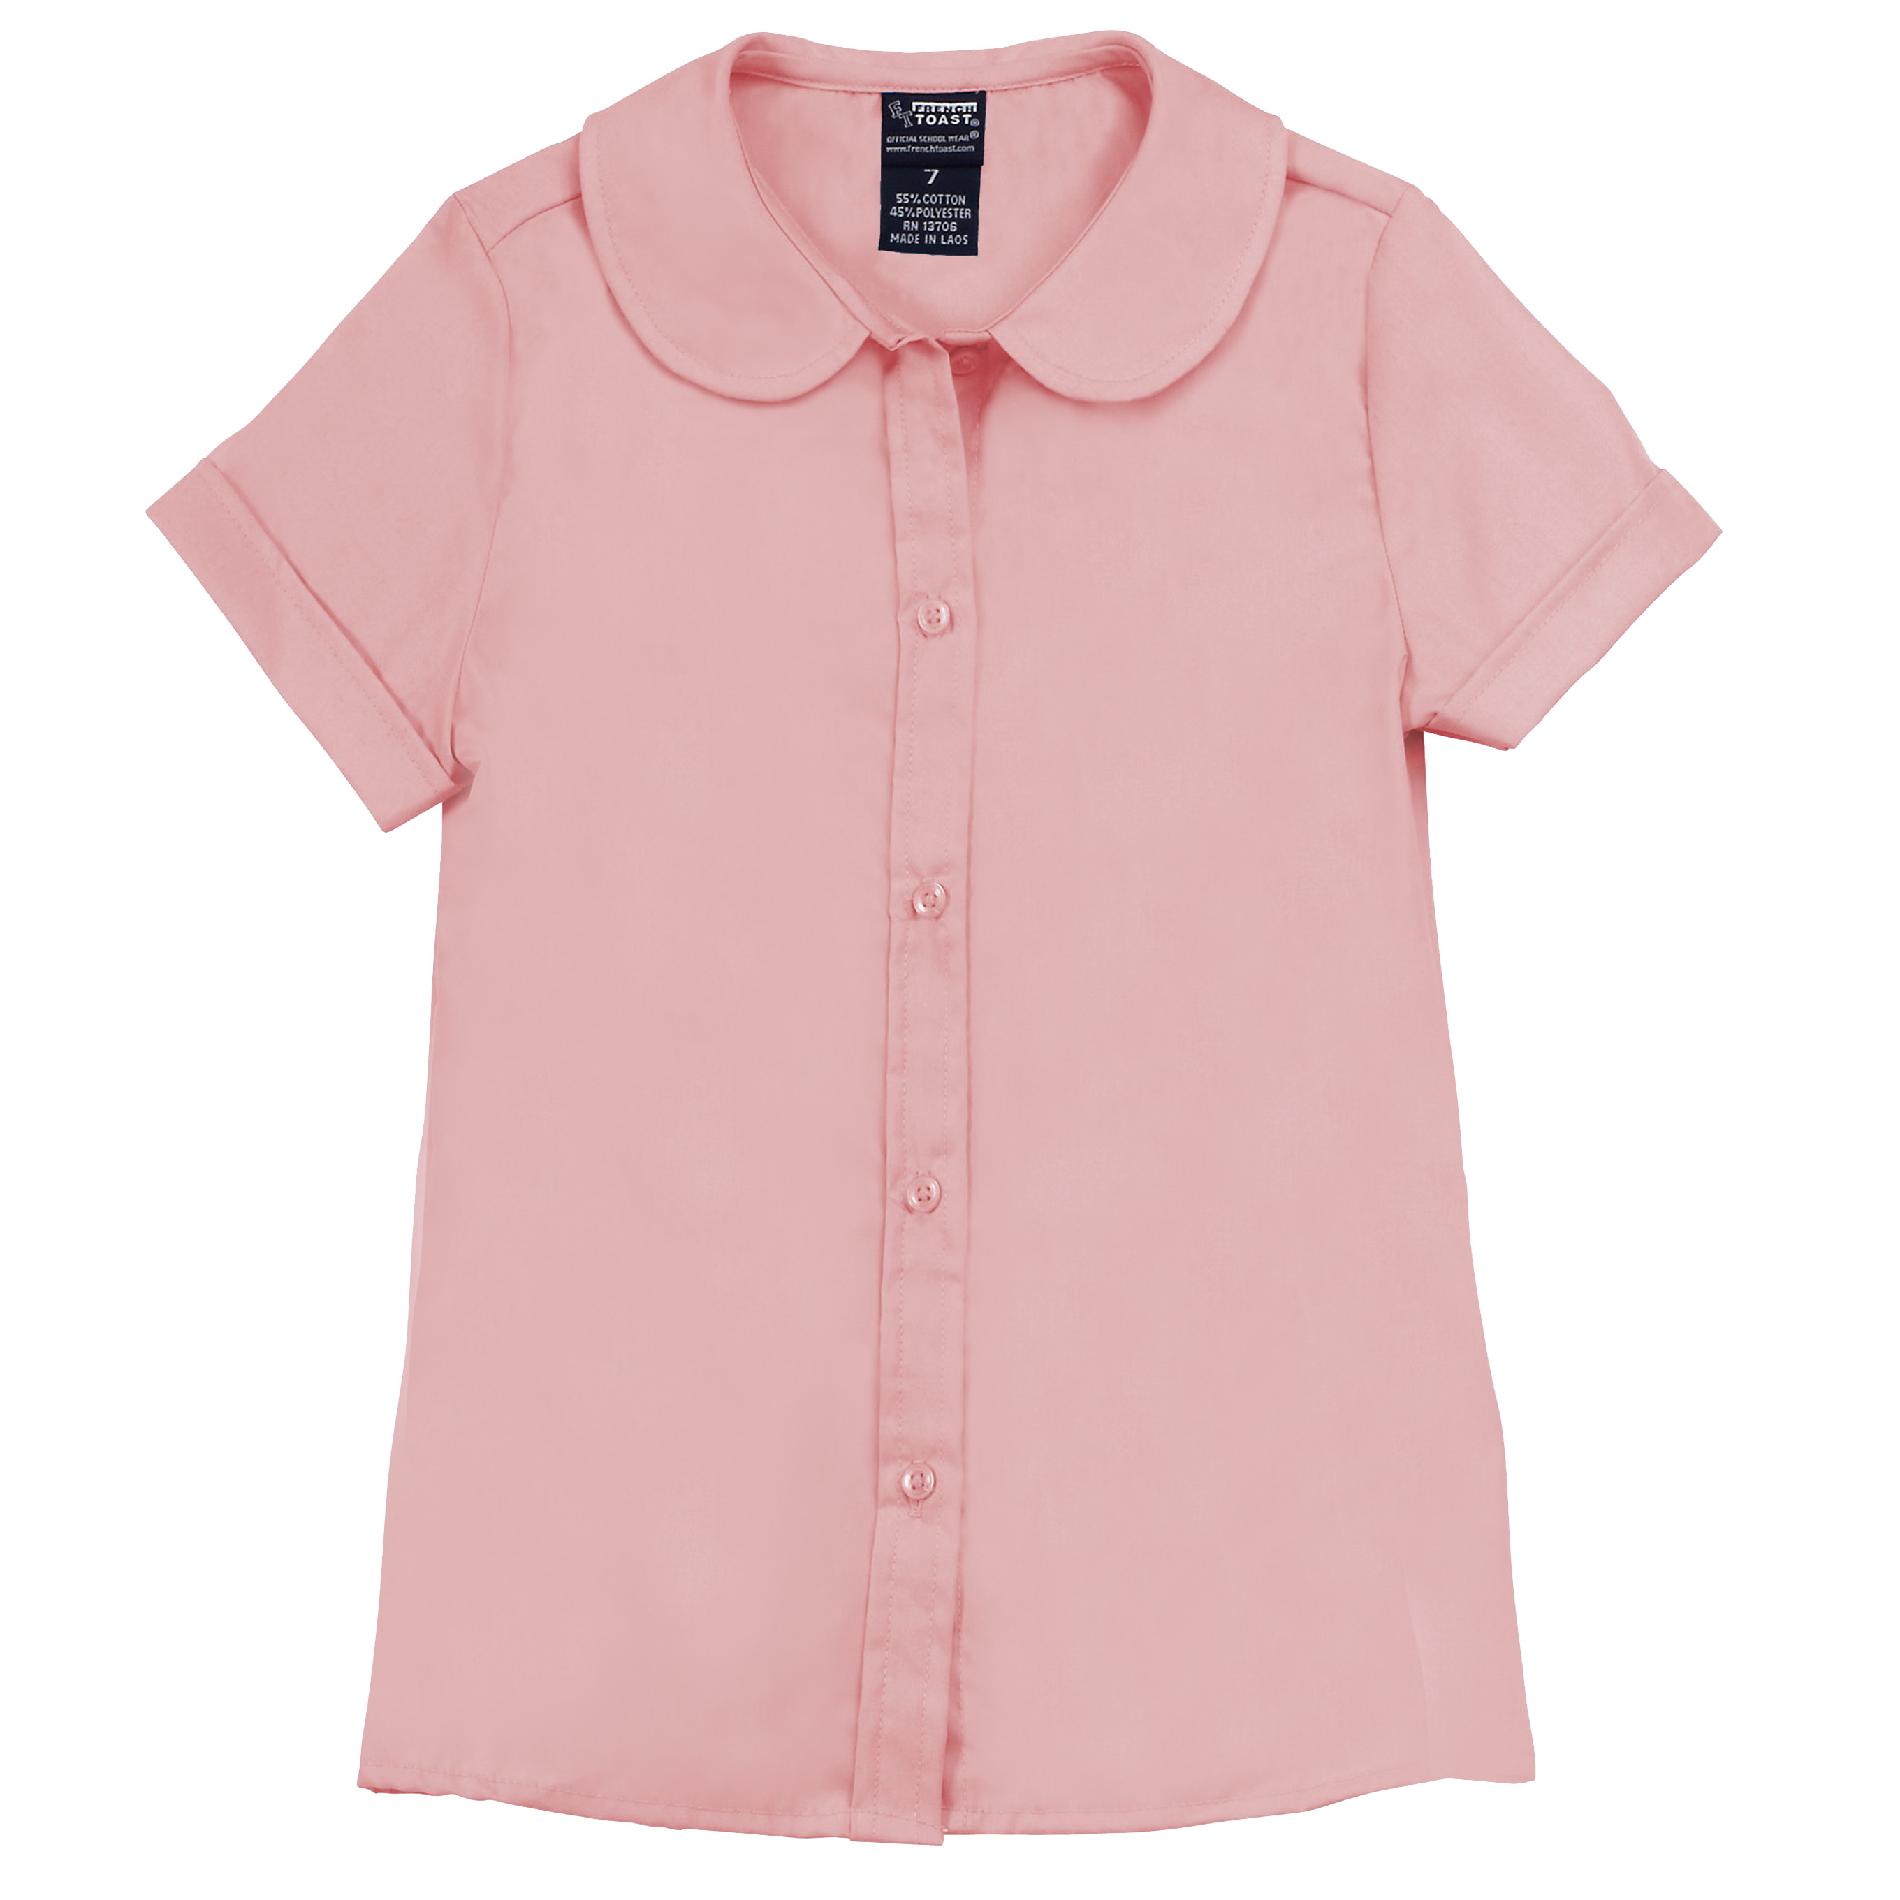 Toddler Short Sleeve Peter Pan Blouse with Lace Trim Collar